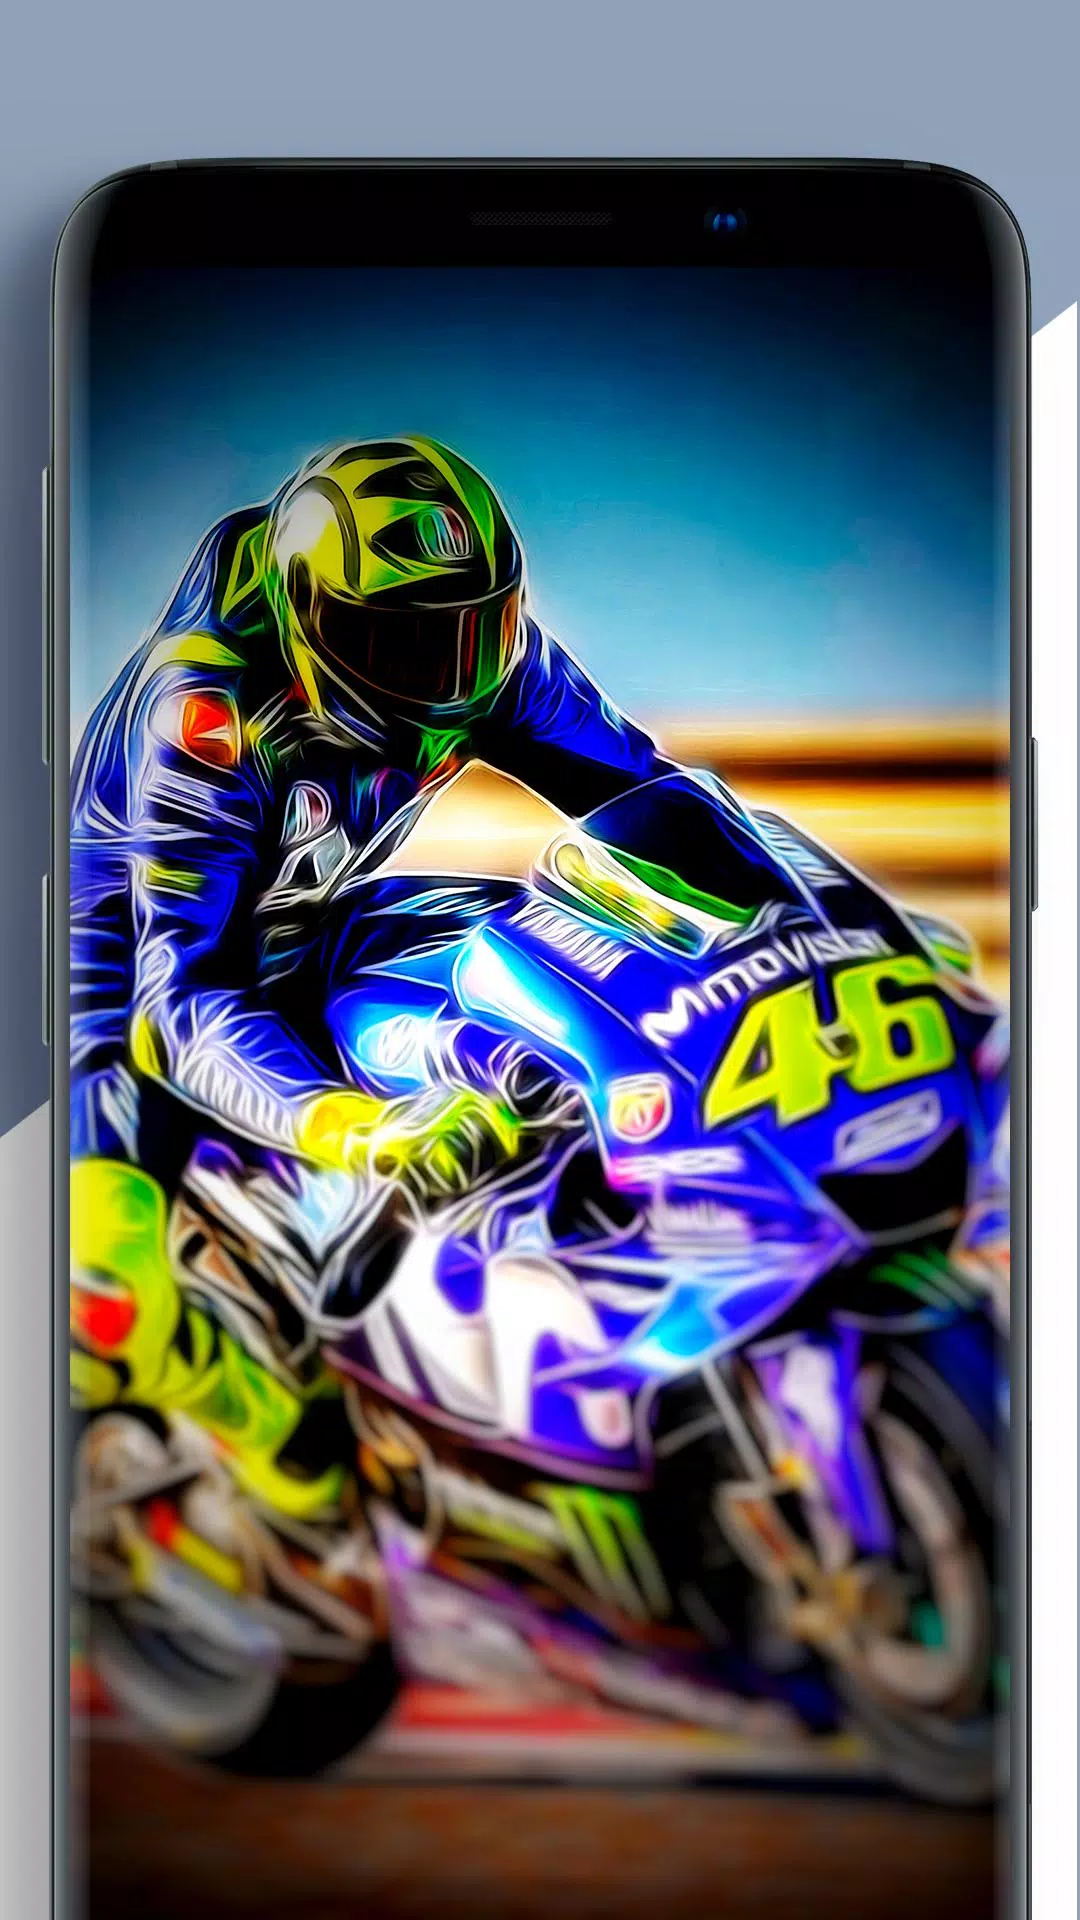 VR46 Valentino Rossi HD Wallpaper LockScreen APK pour Android Télécharger